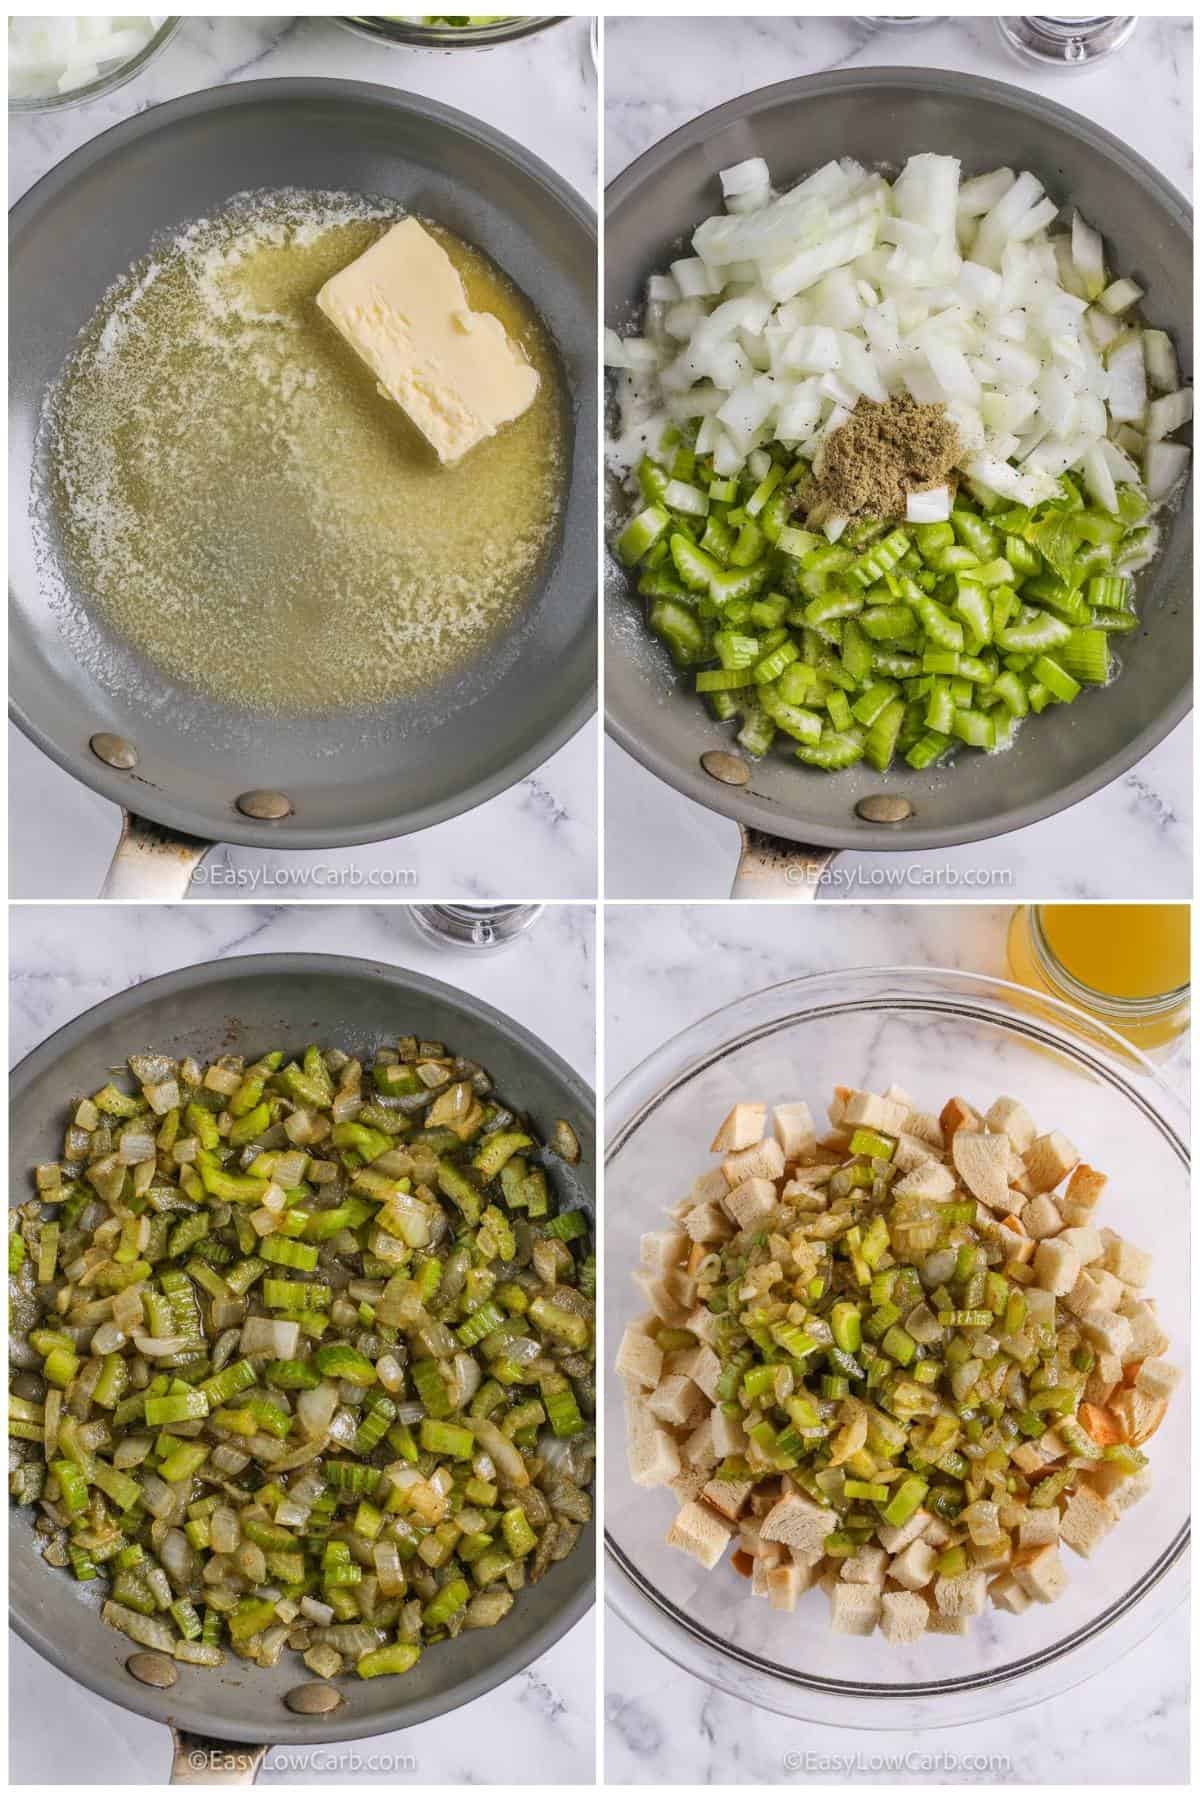 process of adding ingredients together to make Keto Stuffing